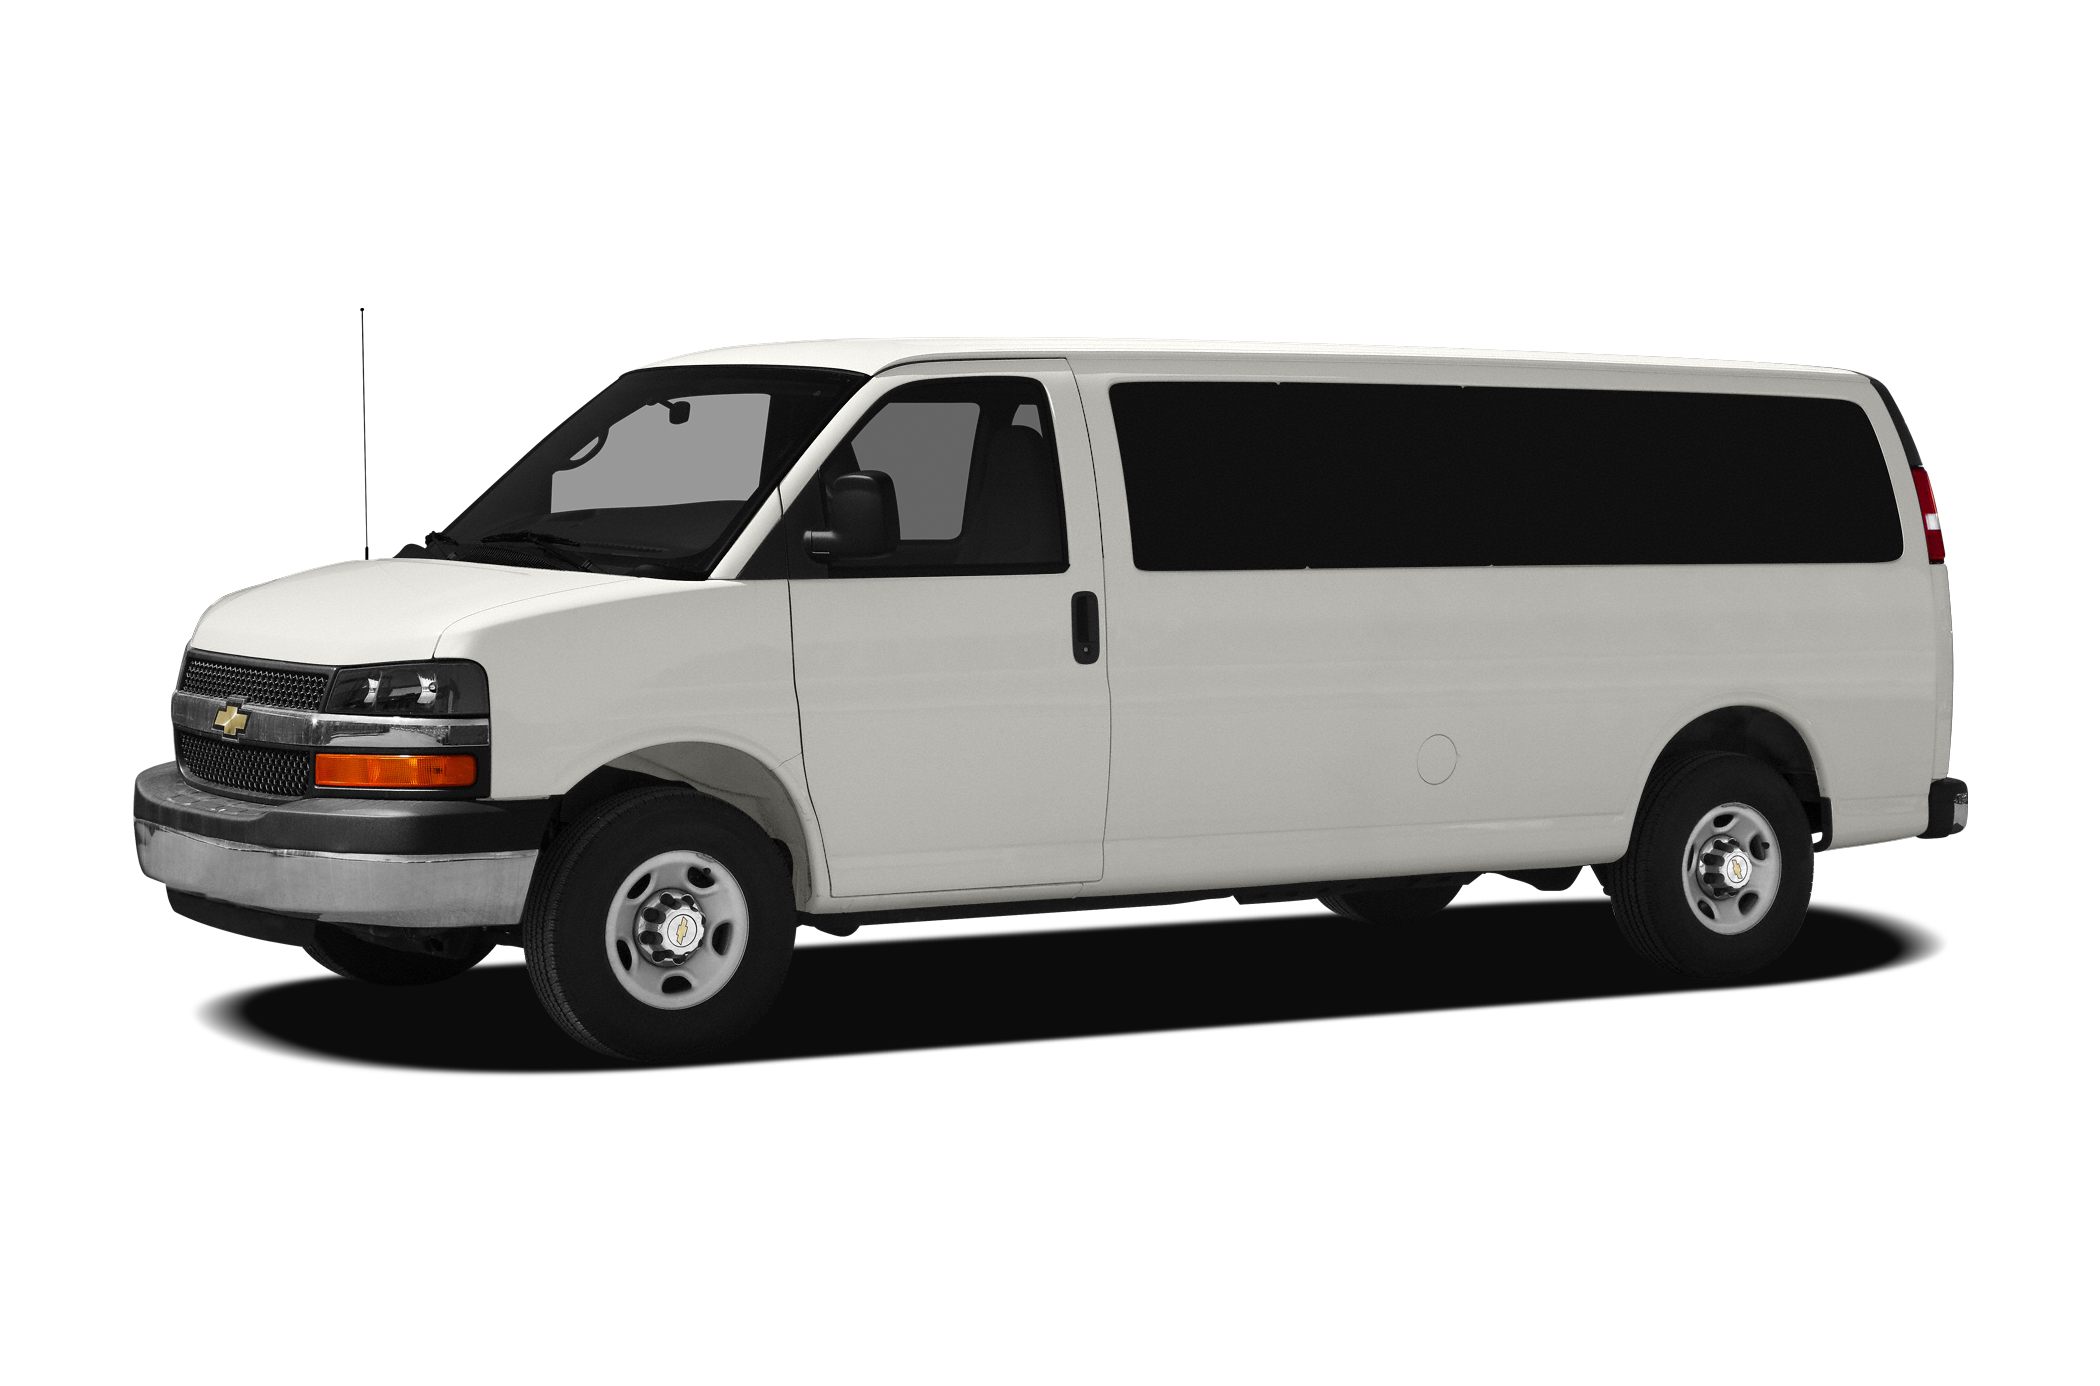 2009 Chevrolet Express 3500 Specs and Prices